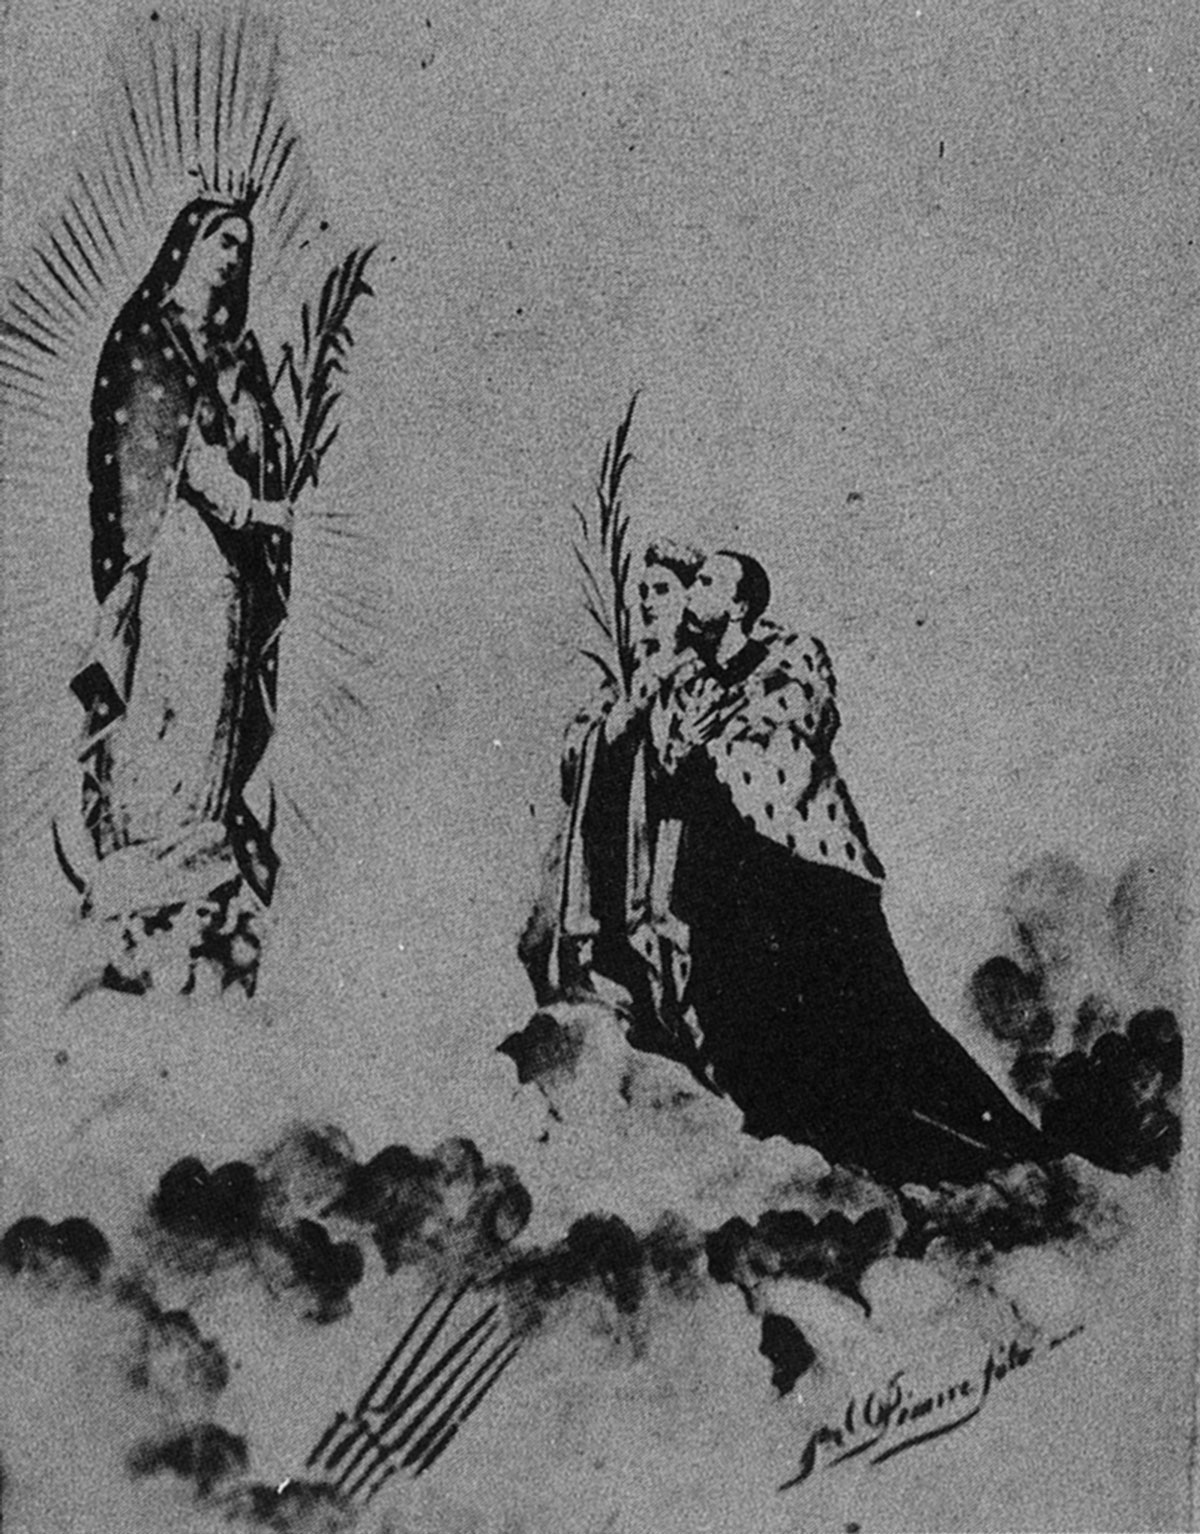 A photograph, circa 1860s, by artist Auguste Péraire entitled “Our Lady of Guadalupe Appearing to the Emperor and Empress in the Clouds above the Cerro de las Campanas.”